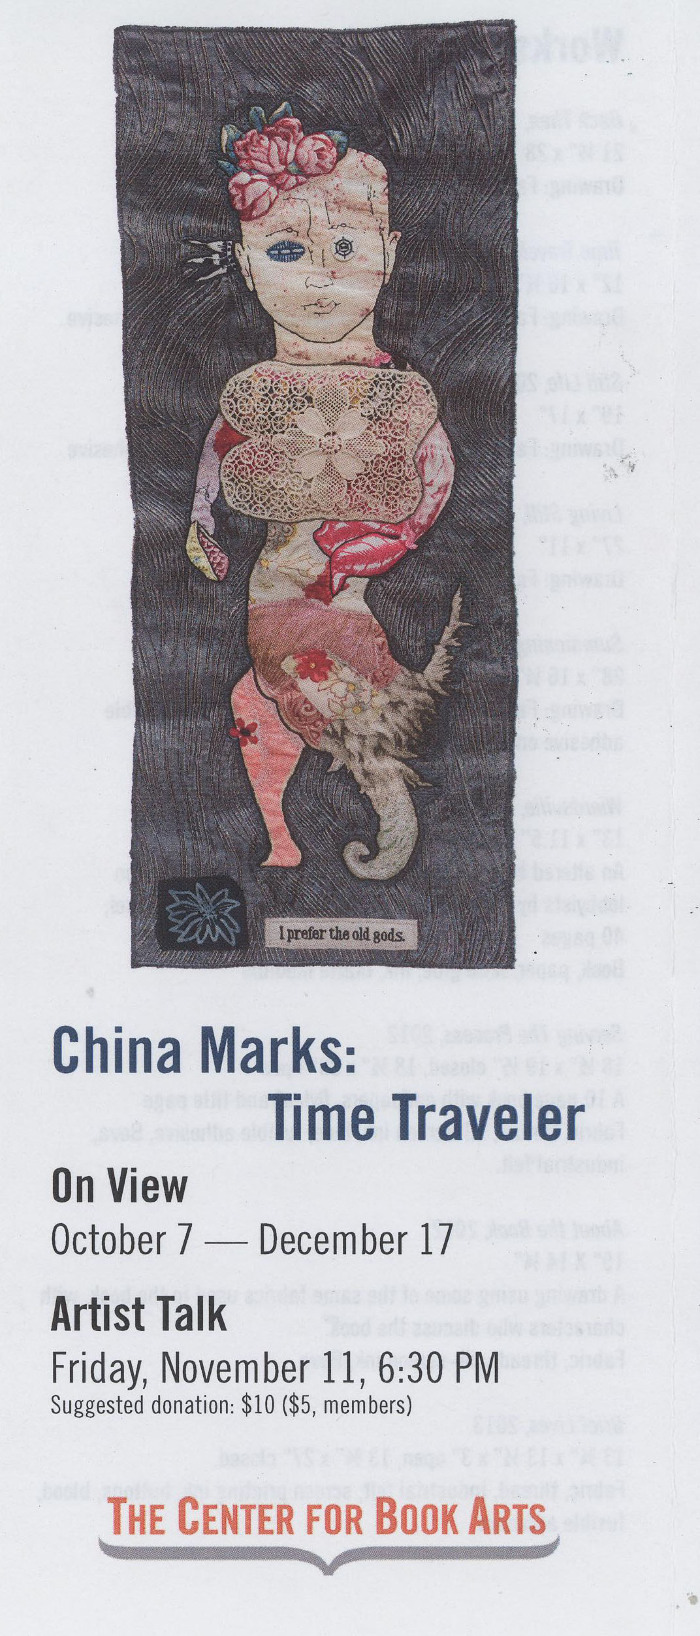 [Exhibition brochure for "China Marks: Time Traveler"]
